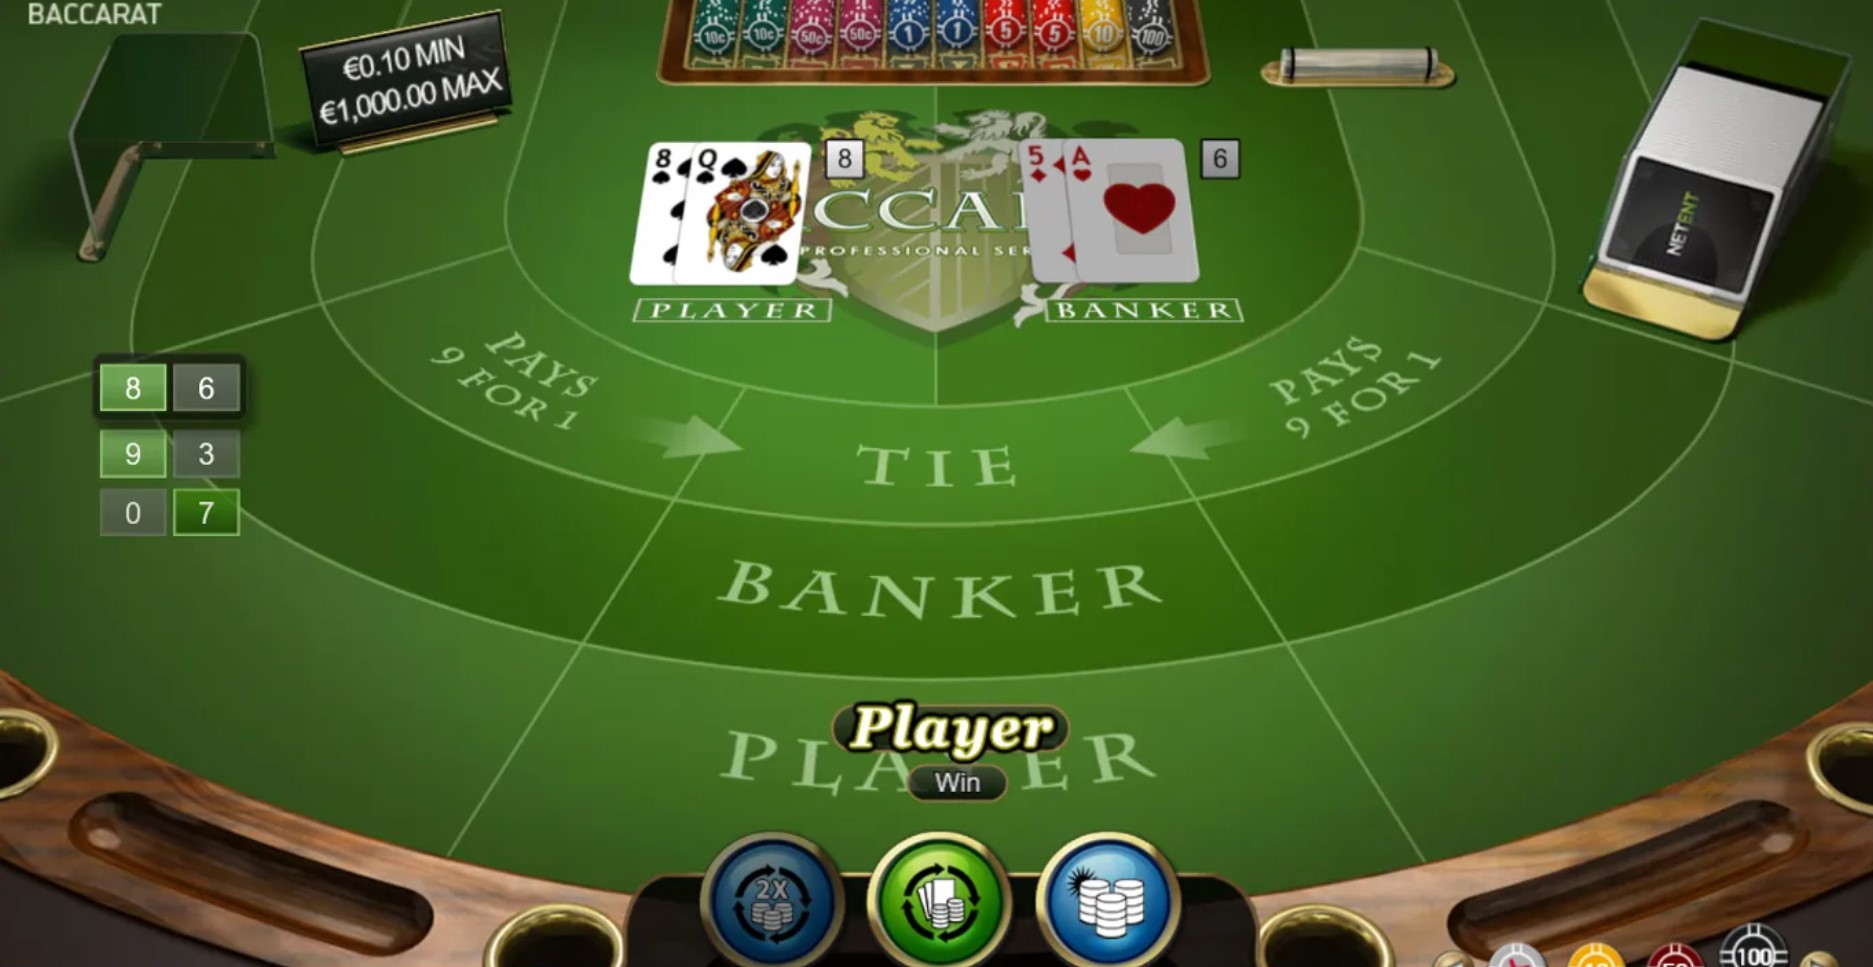 What are the probabilities of winning with different types of baccarat bets